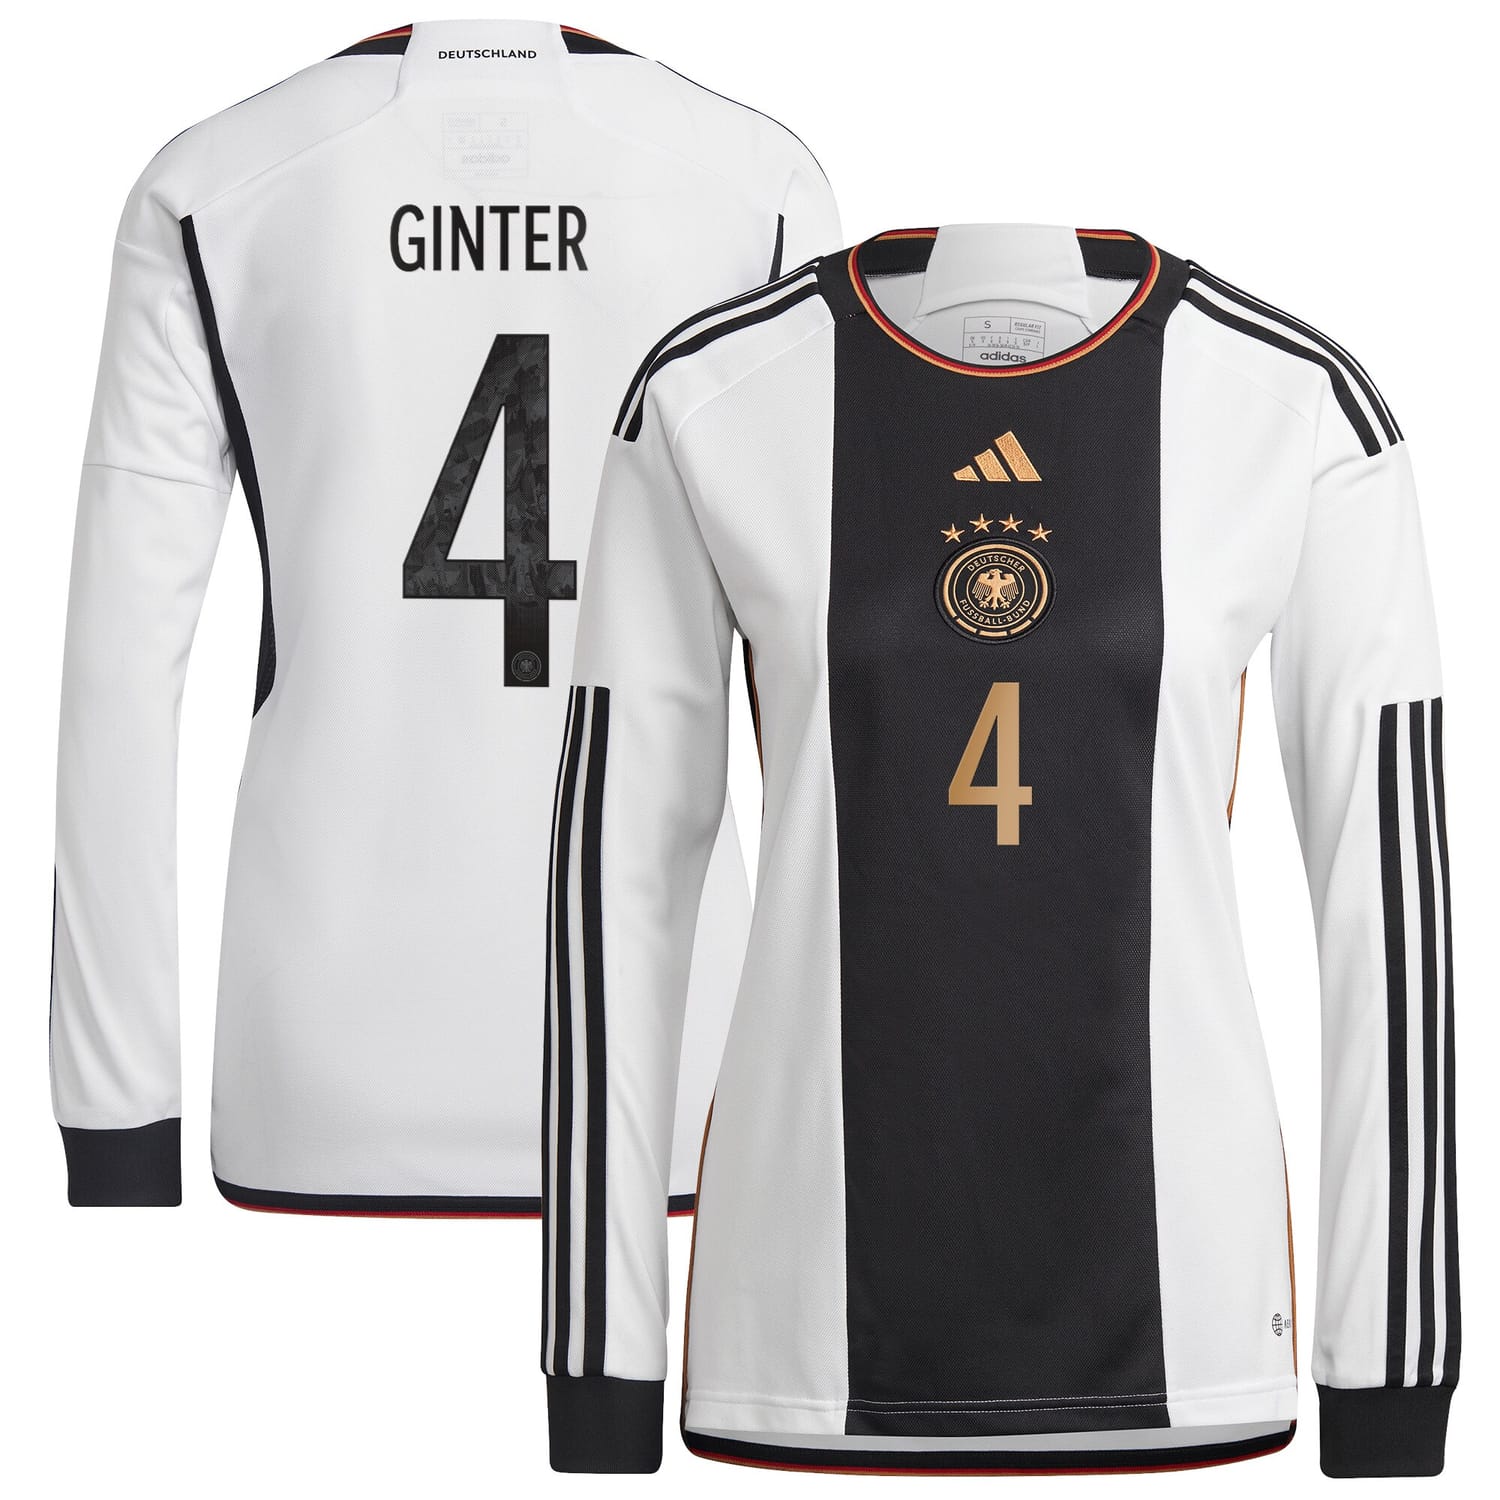 Germany National Team Home Jersey Shirt Long Sleeve player Matthias Ginter 4 printing for Women